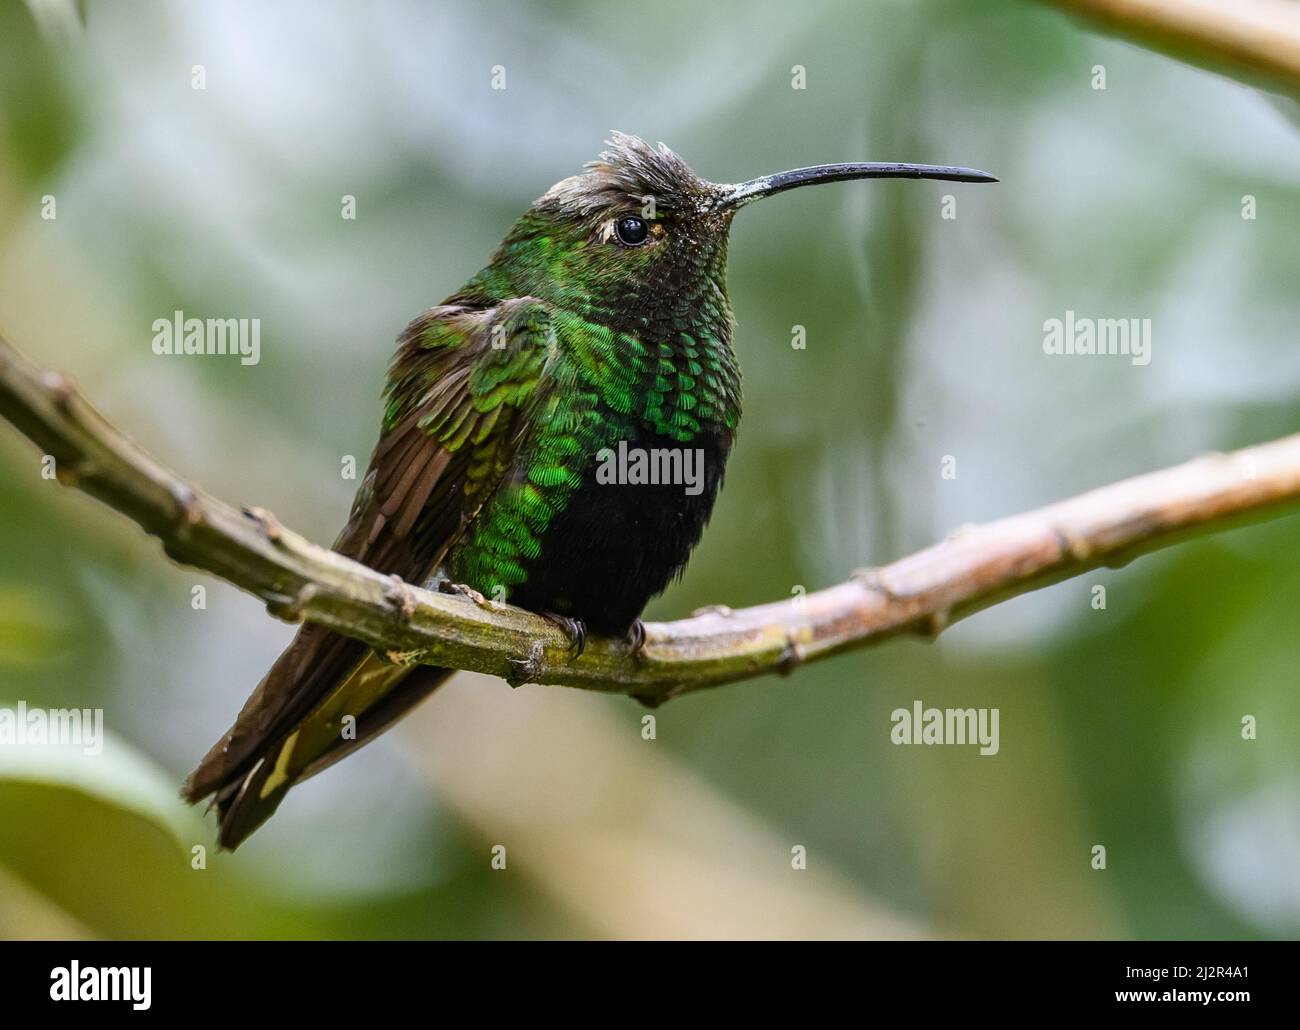 A male Mountain Velvetbreast hummingbird (Lafresnaya lafresnayi) perched on a branch. Colombia, South America. Stock Photo